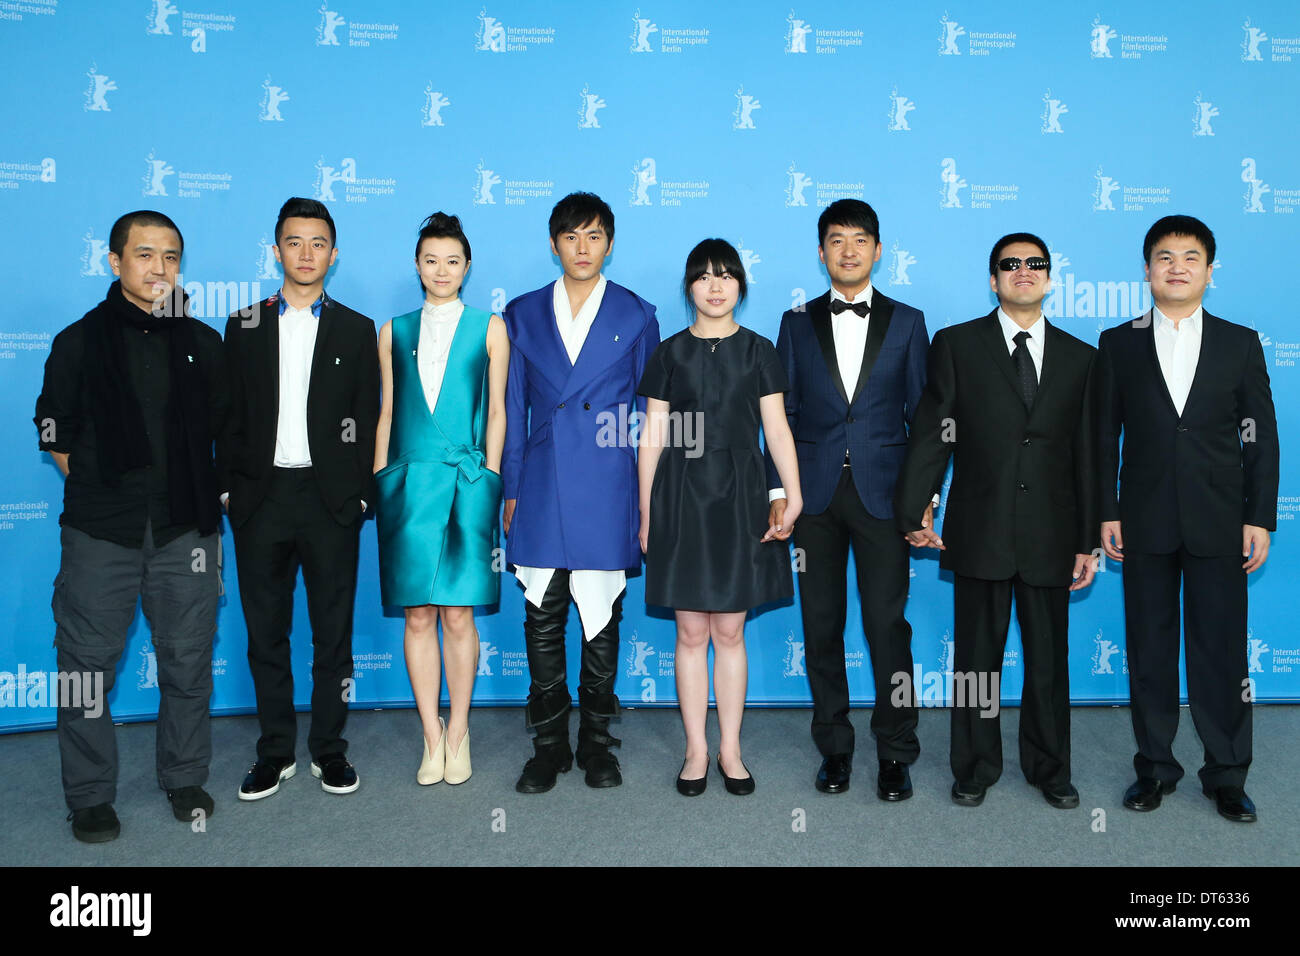 Berlin, Germany. 10th Feb, 2014. Director Lou Ye and actor Huang Xuan, actress Huang Lu, actor Qin Hao, actress Zhang Lei, actor Guo Xiaodong, Mu Huaipeng and Wang Zhihua (from L to R) pose for photos during a photocall to promote the movie 'Blind Massage' at the 64th Berlinale International Film Festival in Berlin, Germany, on Feb. 10, 2014. 'Blind Massage' is one of the three Chinese films vying for prizes in the Competition program. Credit:  Zhang Fan/Xinhua/Alamy Live News Stock Photo